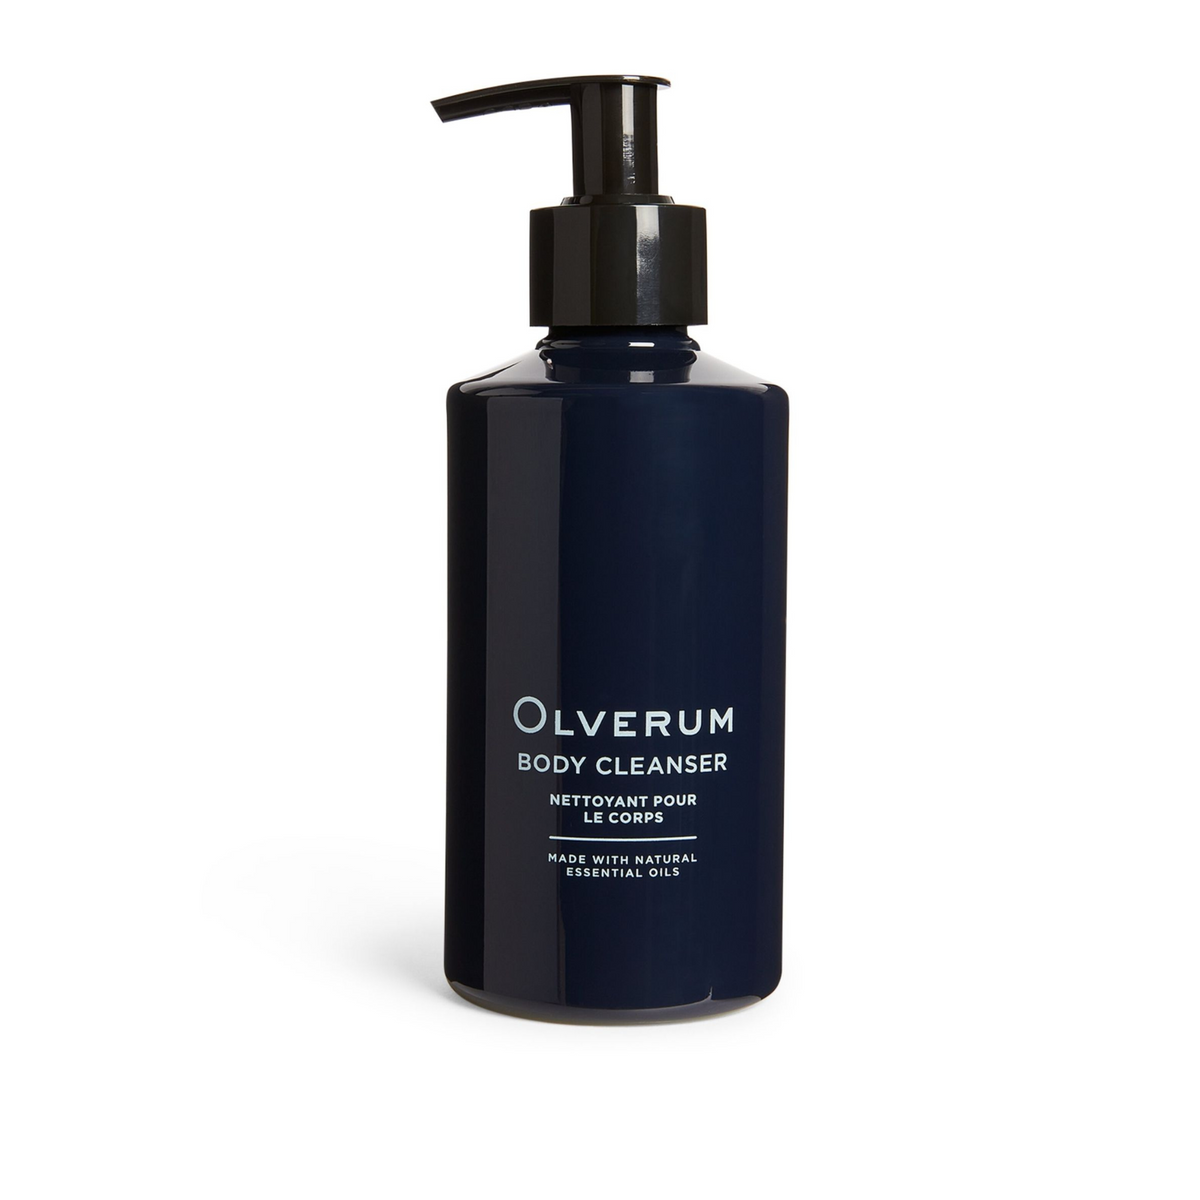 primary mage of olverum body cleanser